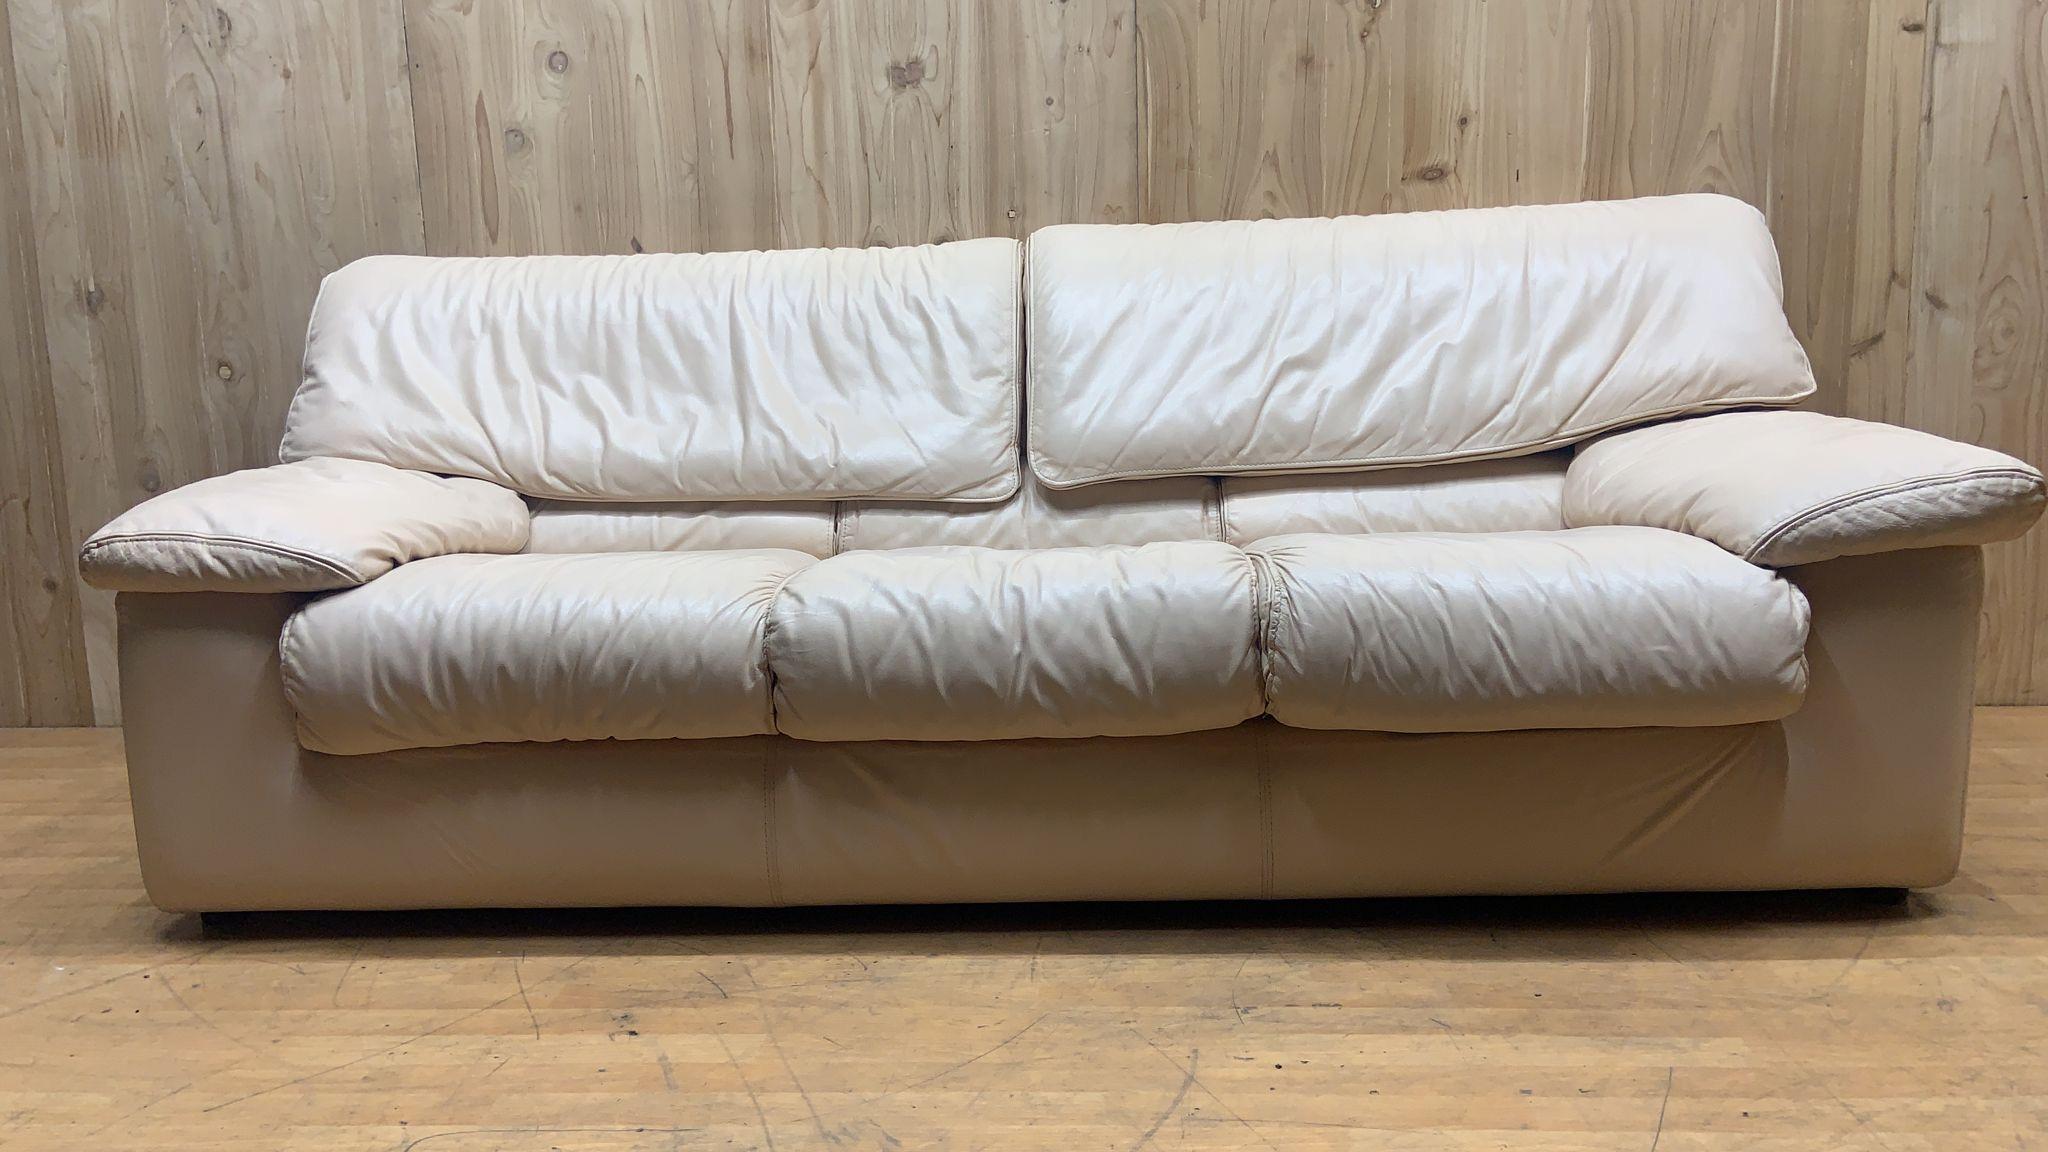 Vintage French Post-Modern Peachy Cream Draping Leather Sofa by Roche-Bobois

Gorgeous Post Modern Rich Soft Draping French Leather, Wide Arm 3 Seat Sofa by Roche-Bobois in a Peachy-Cream leather. 

Circa 1980

Dimensions:
W 86”
D 40”
H 33”

Seat H 